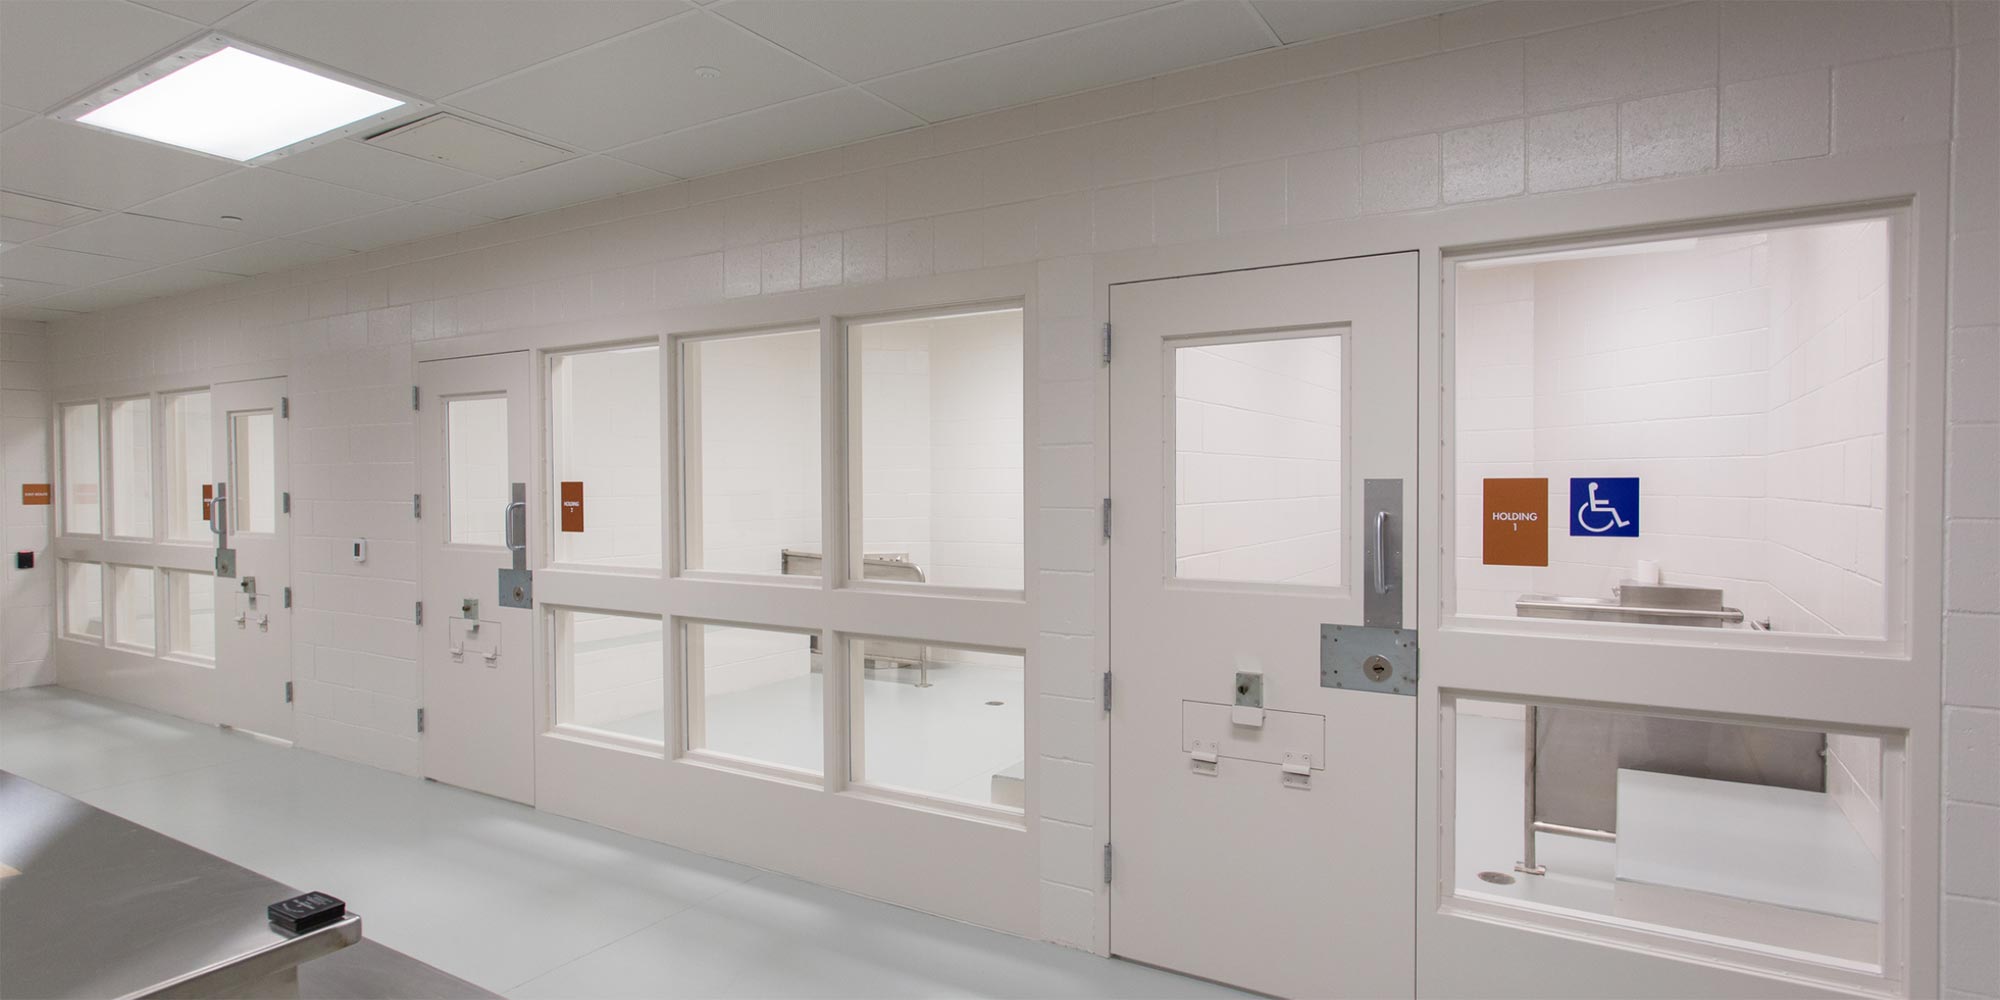 In correctional facilities, where the well-being of inmates and staff depends on various factors, ensuring the safety and security of occupants is of utmost importance. Fortunately, we have covered you with a lineup of manufacturers offering lighting solutions explicitly designed for correctional facilities' unique needs.